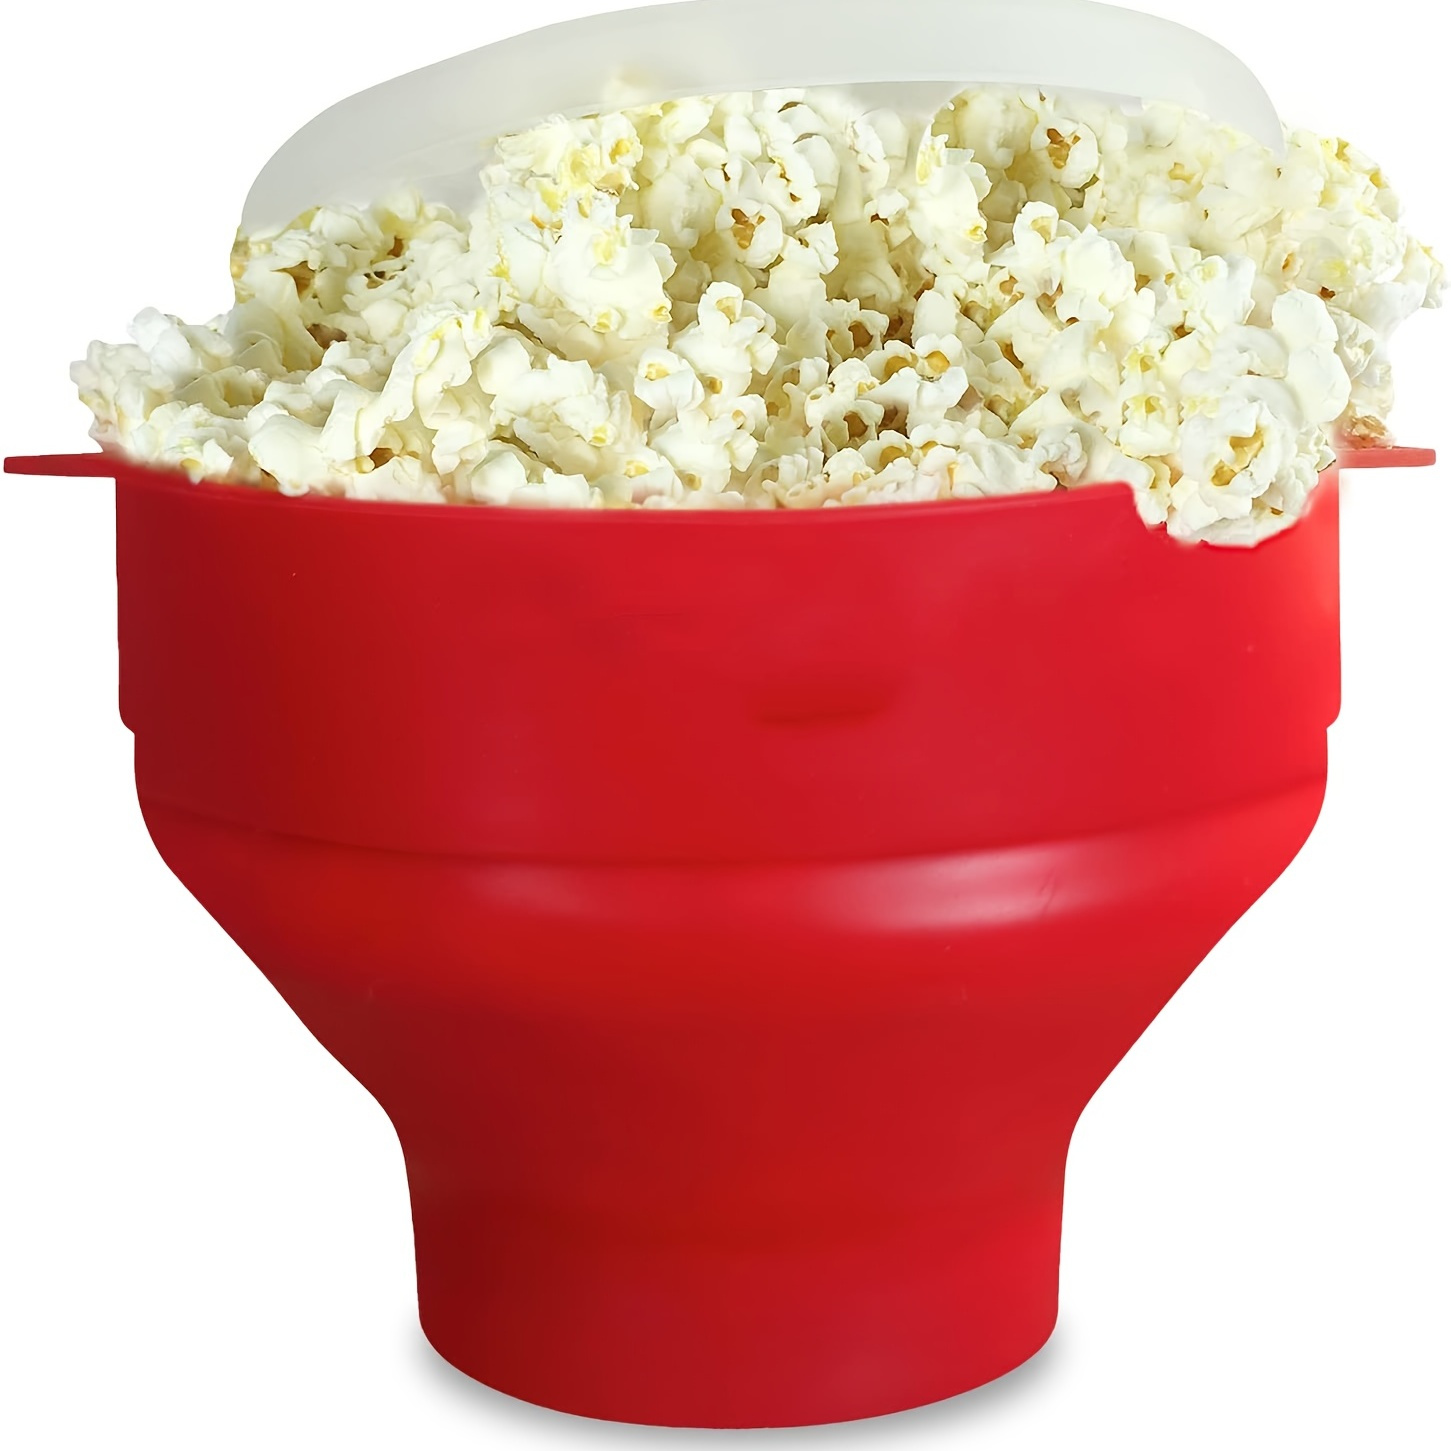 Micro-Pop Popcorn Popper, With 3-in-1 Lid - Ecolution – Ecolution